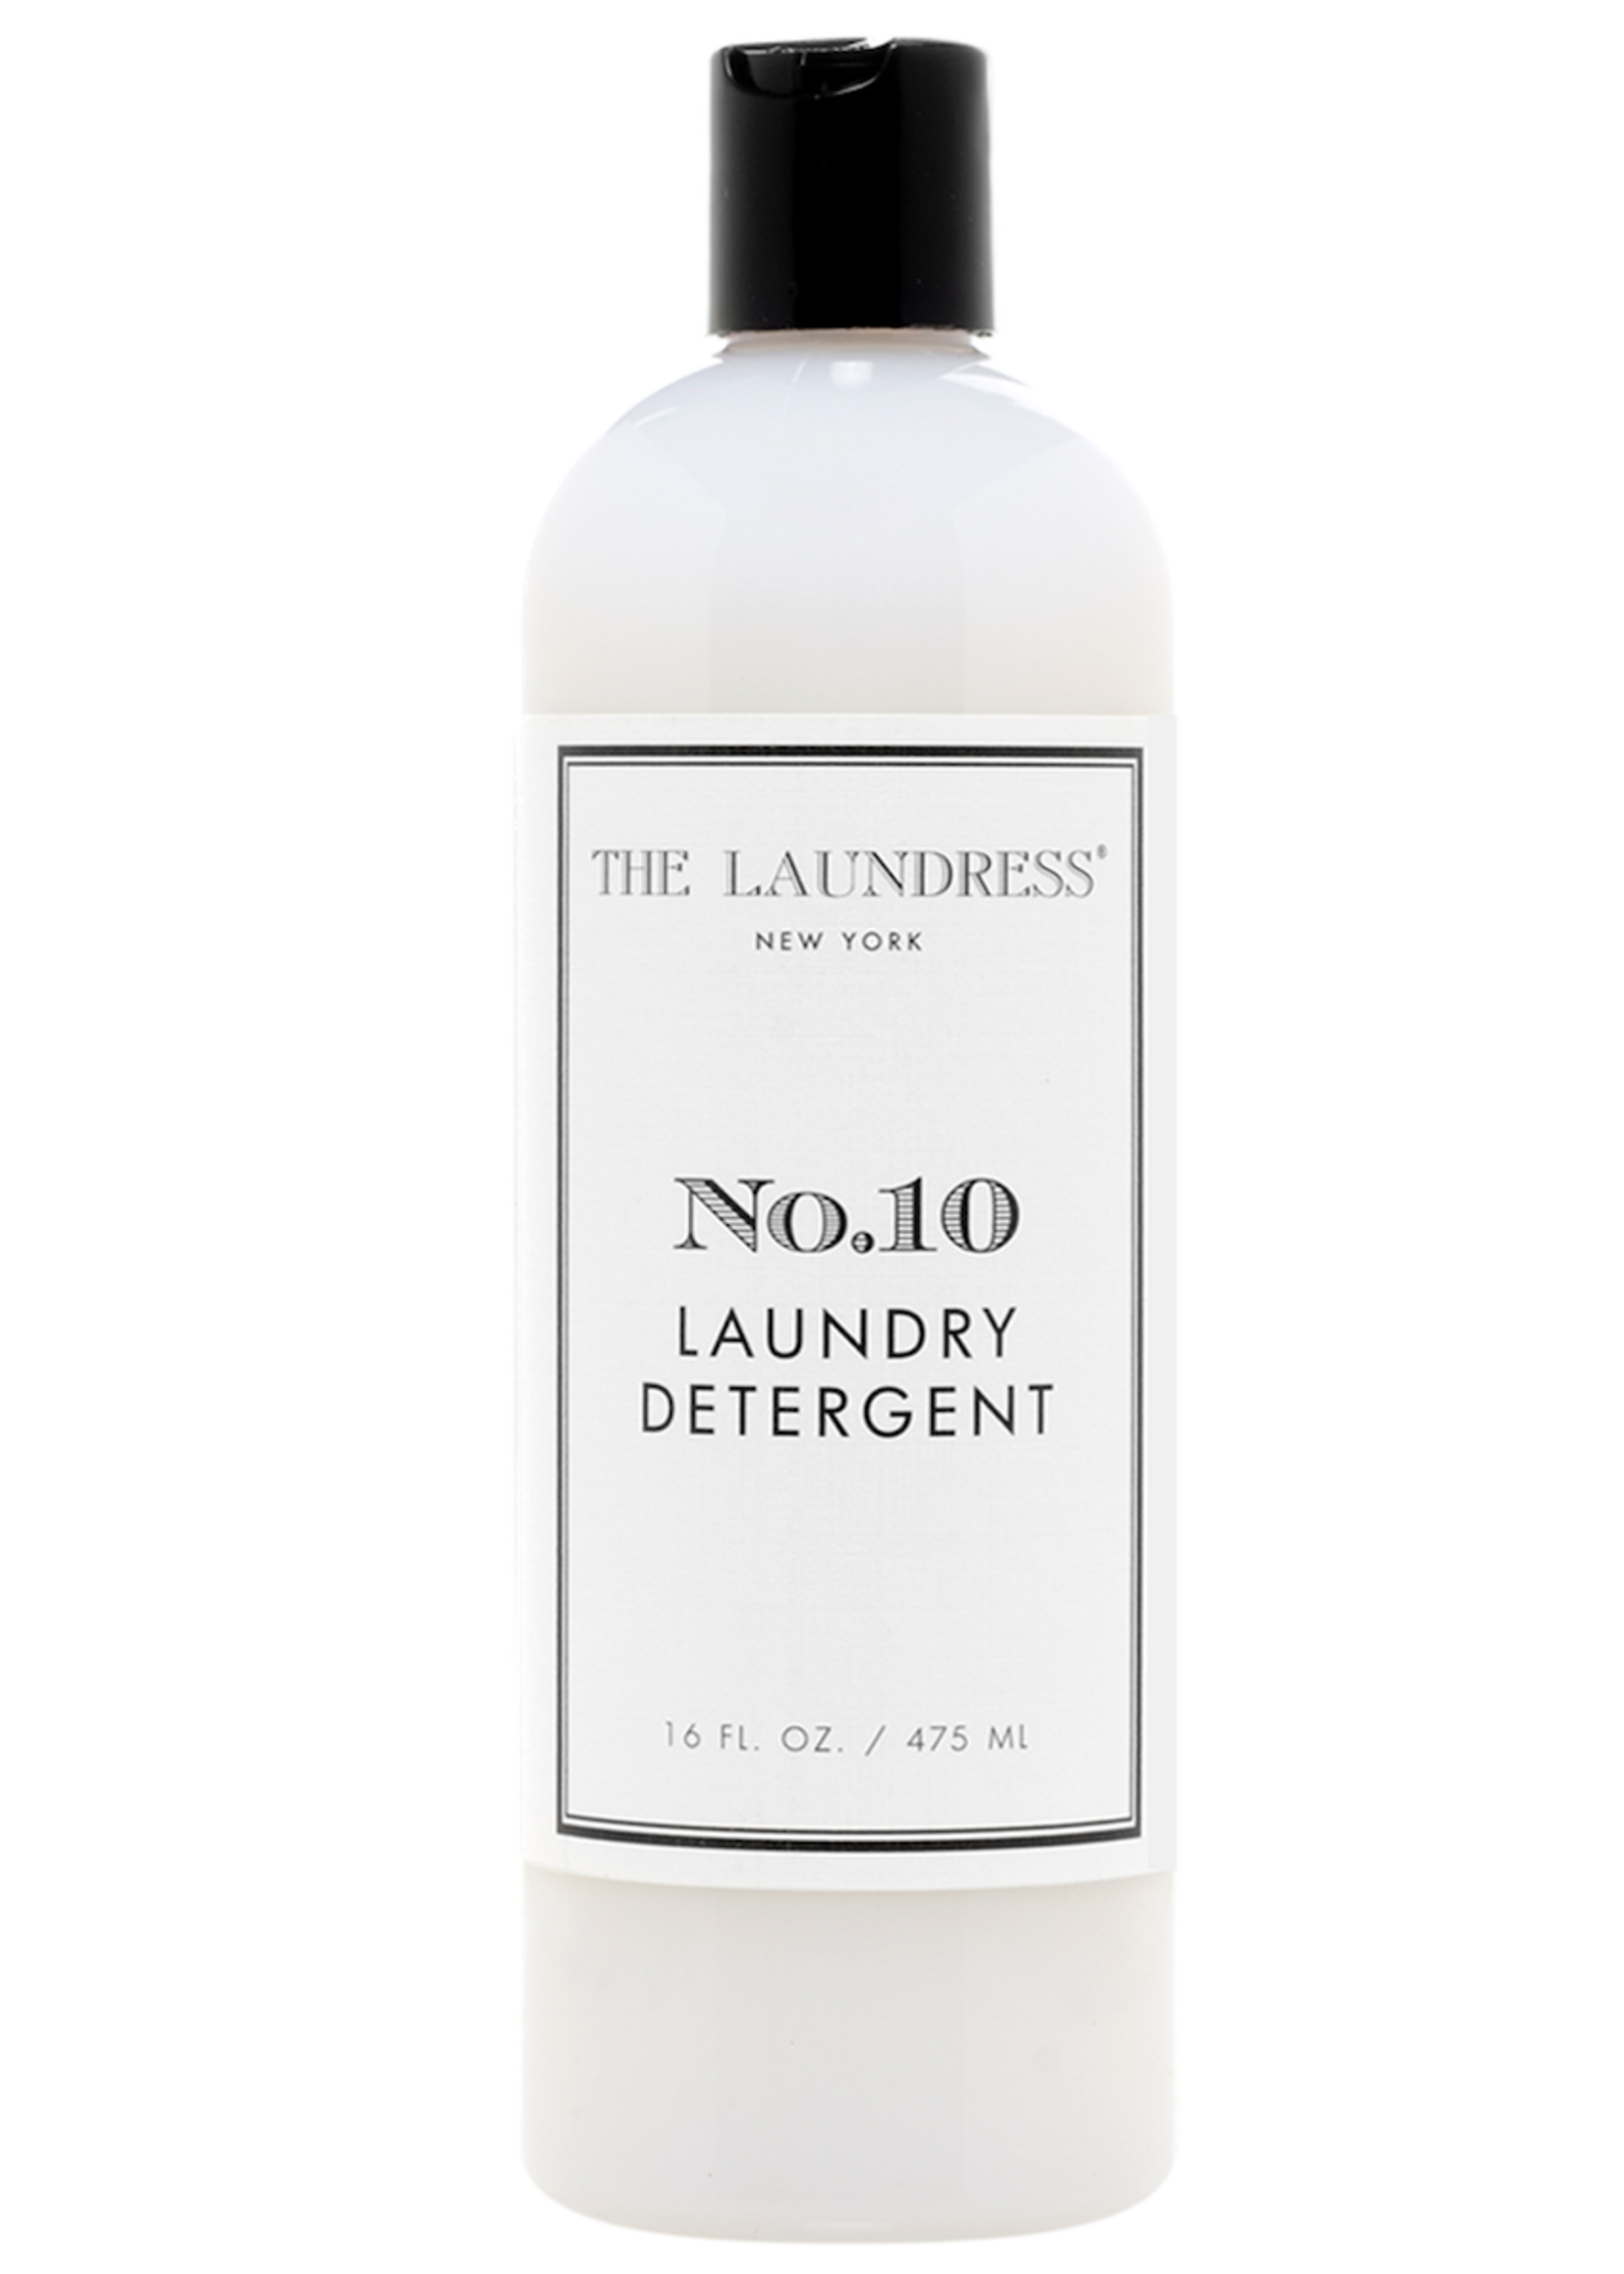 The Laundress New York No. 10 Laundry Detergent